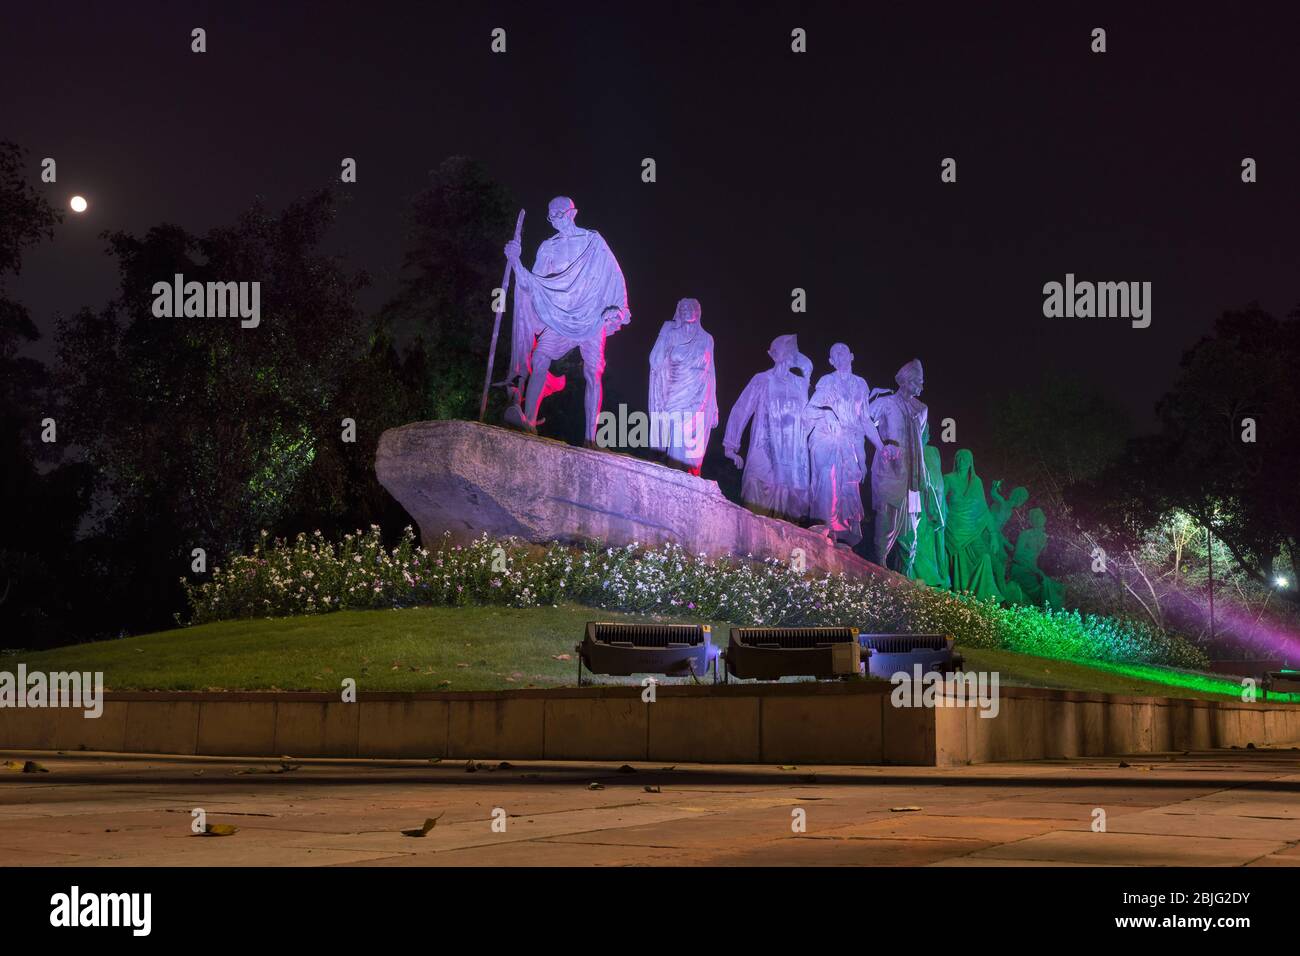 New Delhi / India - September 16, 2019: Dandi March Statue illuminated at night, commemorating the Salt March of 1930, with Gandhi and his followers i Stock Photo